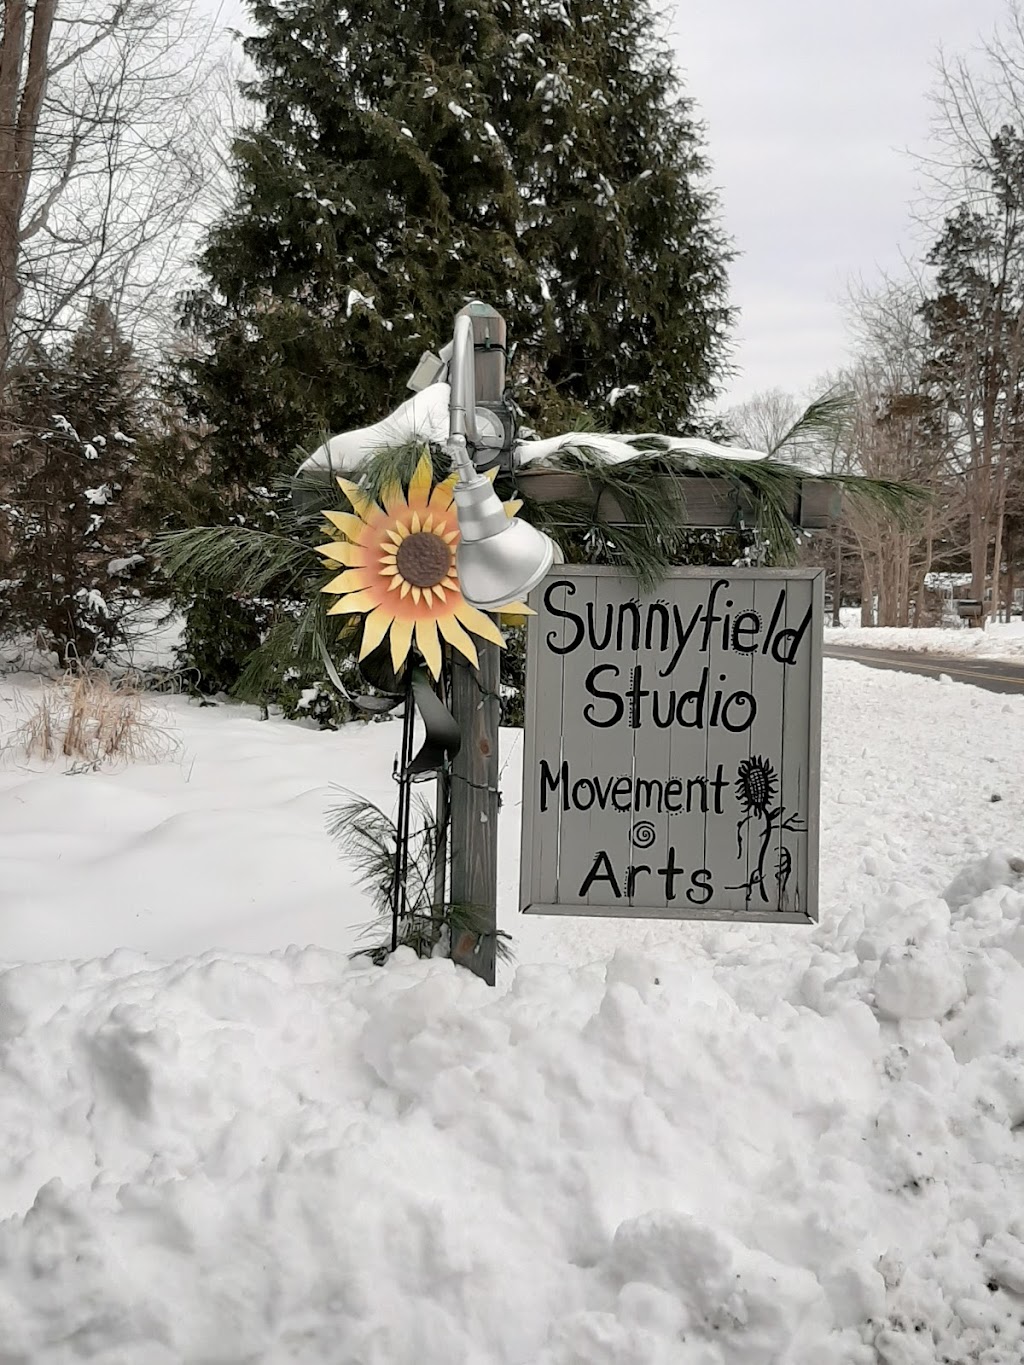 Sunnyfield Studio | 353 Old Field Rd, Southbury, CT 06488 | Phone: (203) 264-9189